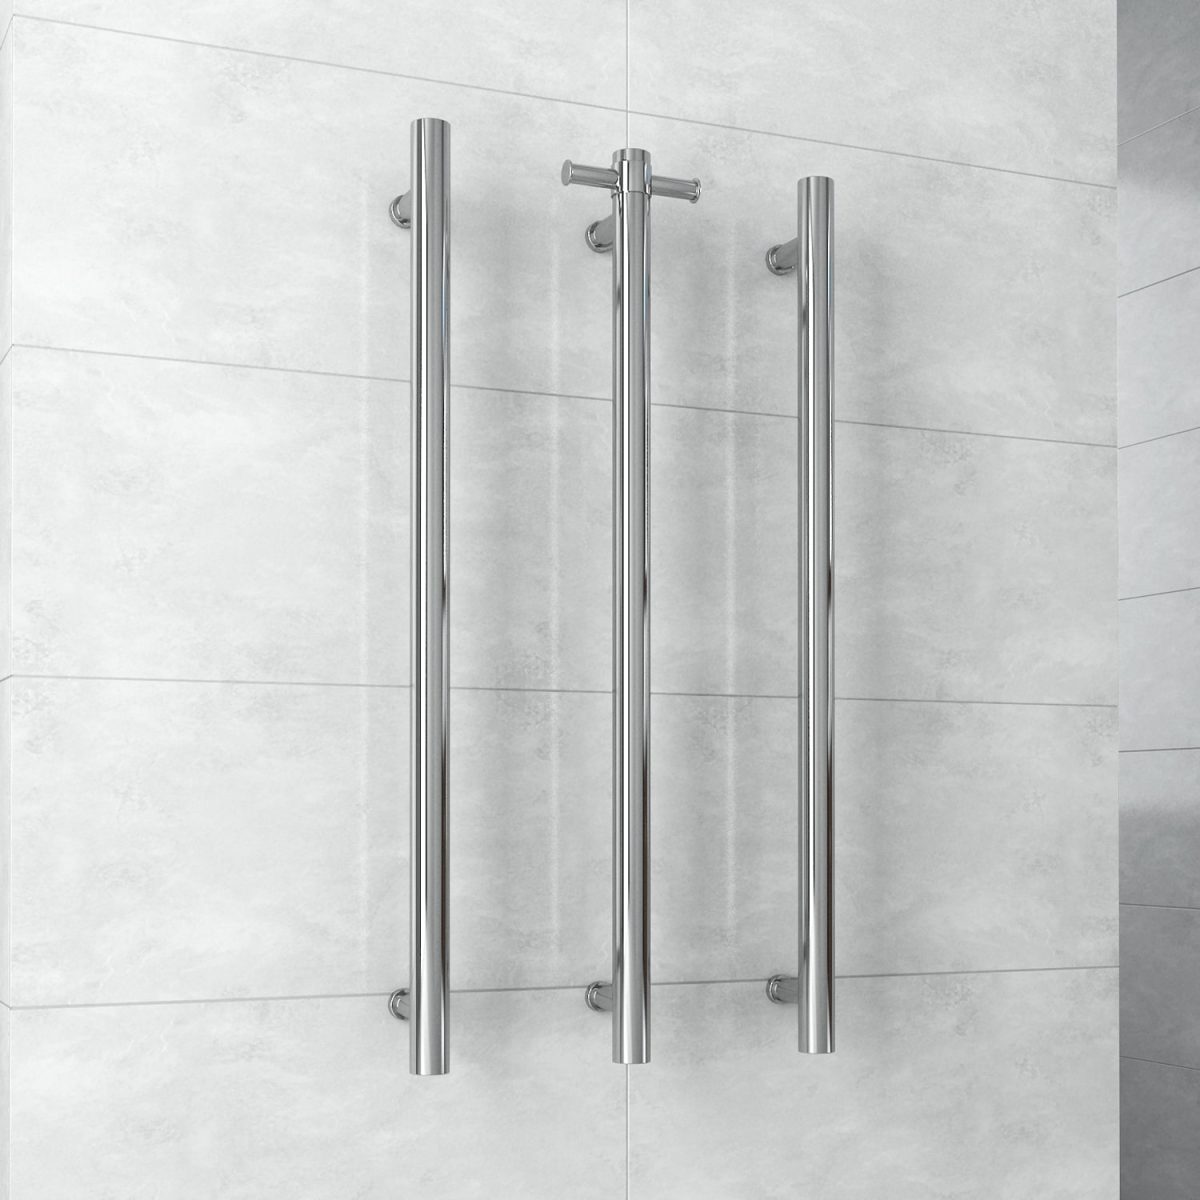 THERMOGROUP VS900H VERTICAL SINGLE HEATED TOWEL RAIL STRAIGHT ROUND